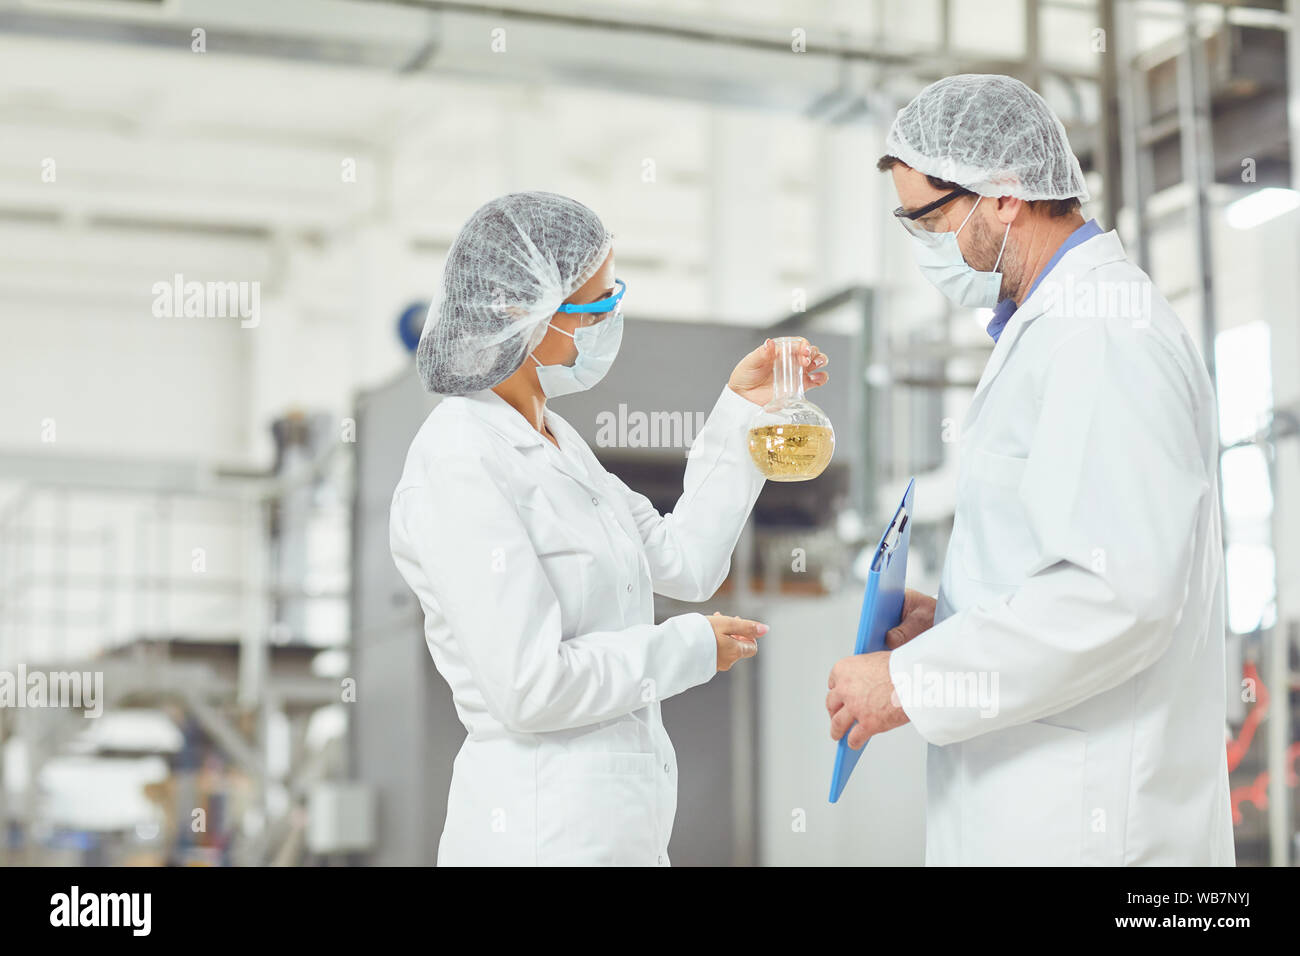 Worker in masks and coats look at the liquid in the flask at work. Stock Photo